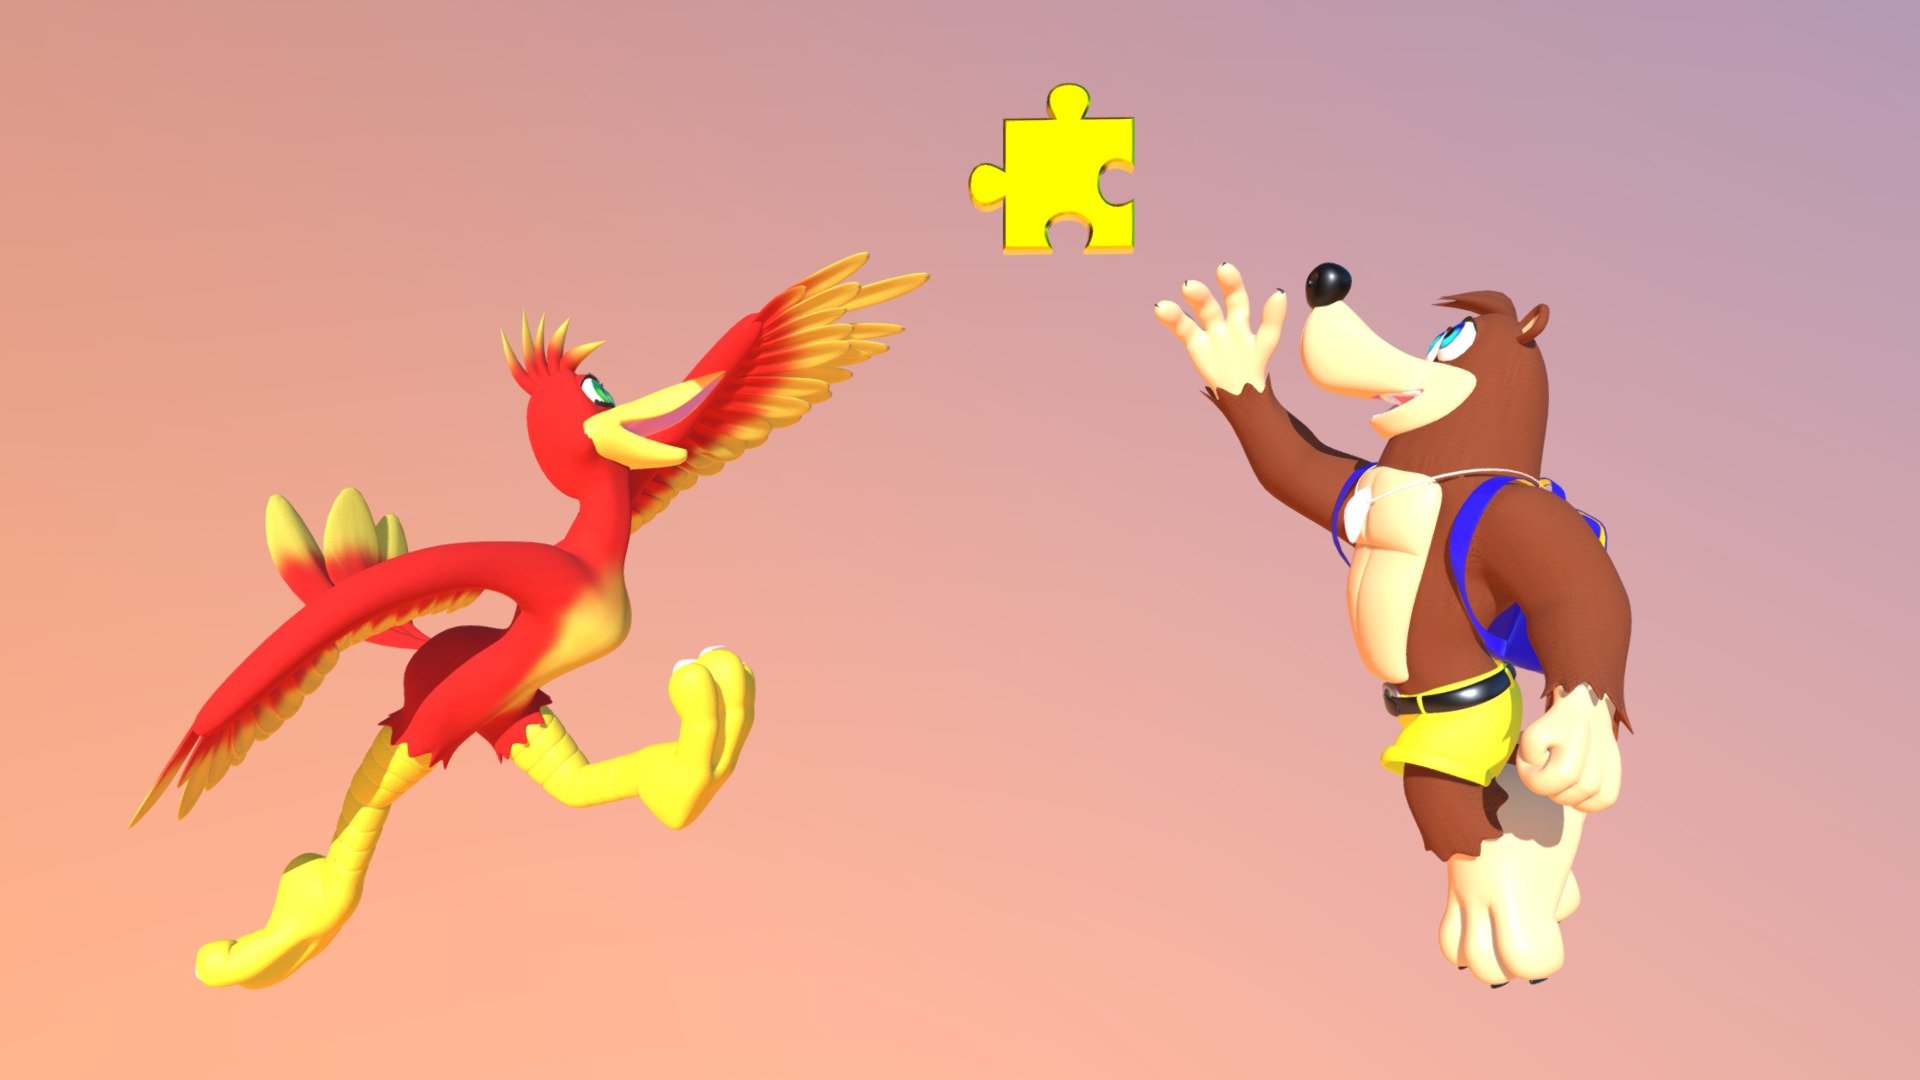 Banjo and Kaoozie, from their beloved platform-adventure “collectathon” game, grabbing a Jiggy. The models were meant for updating my Banjo-Kazooie submission for the Source Filmmaker workshop, but I decided against this. But I didn’t want my work to go to waste, so I stylized the models, and uploaded them to Sketch Fab to show off.

I also experimented a little of giving the models more detailed textures. More specifically, giving the textures a more rough look. But still keeping a simple, cartoony look.

Needless to say though, this was a big hassle to upload and setup, since there are many objects and materials. In retrospect, maybe I should’ve uploaded the duo individually 3d model